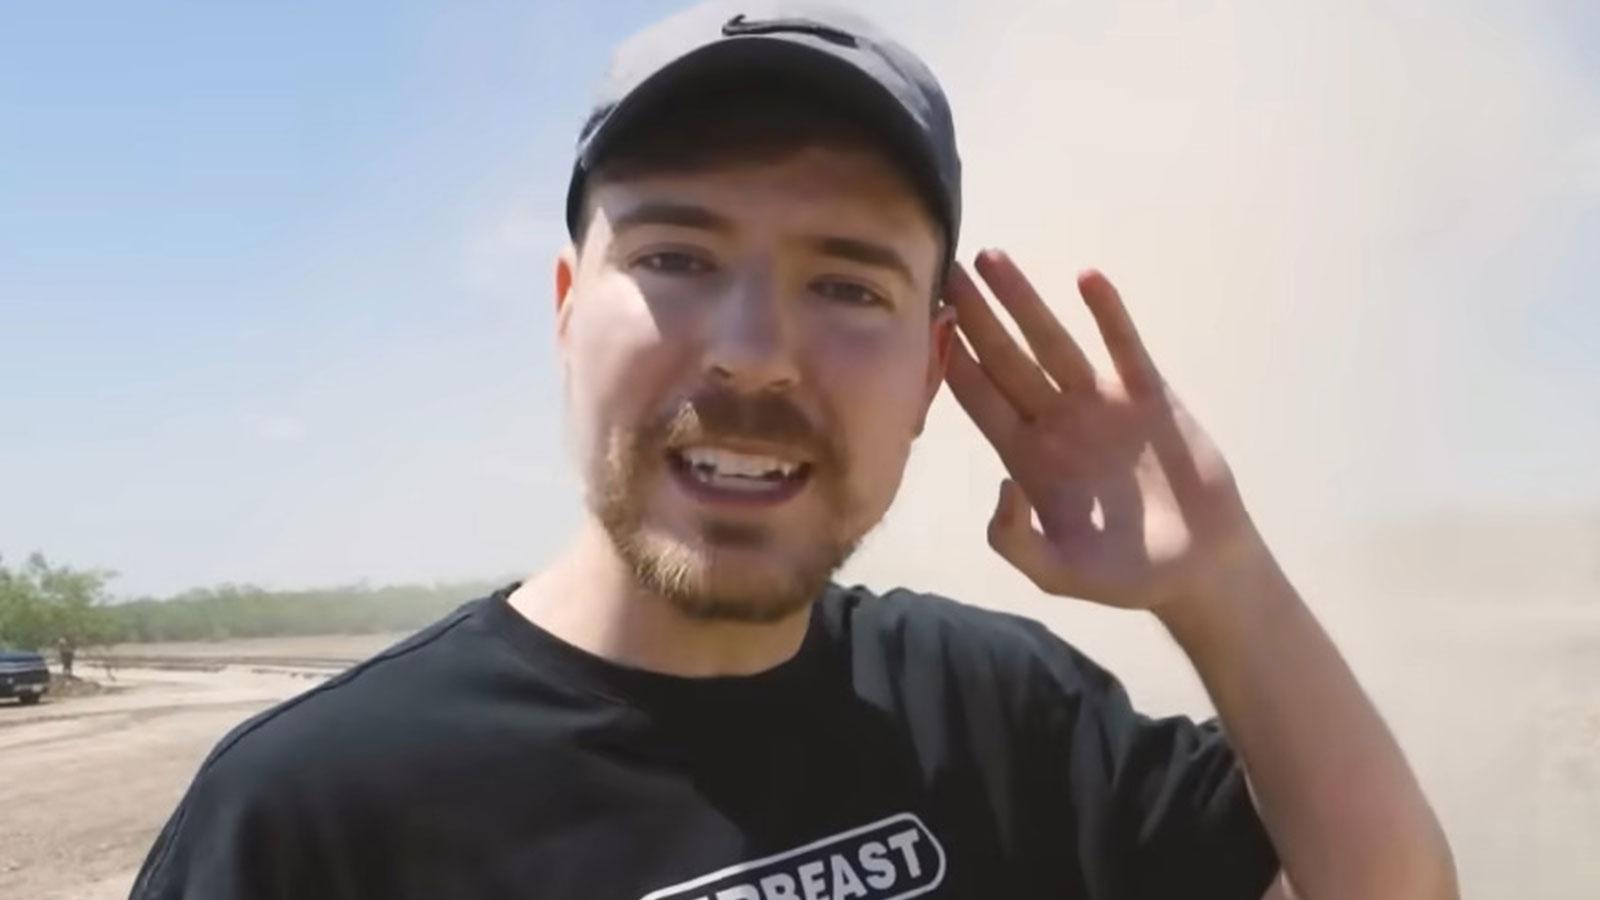 YoUTuber MrBeast holding his hand to ear